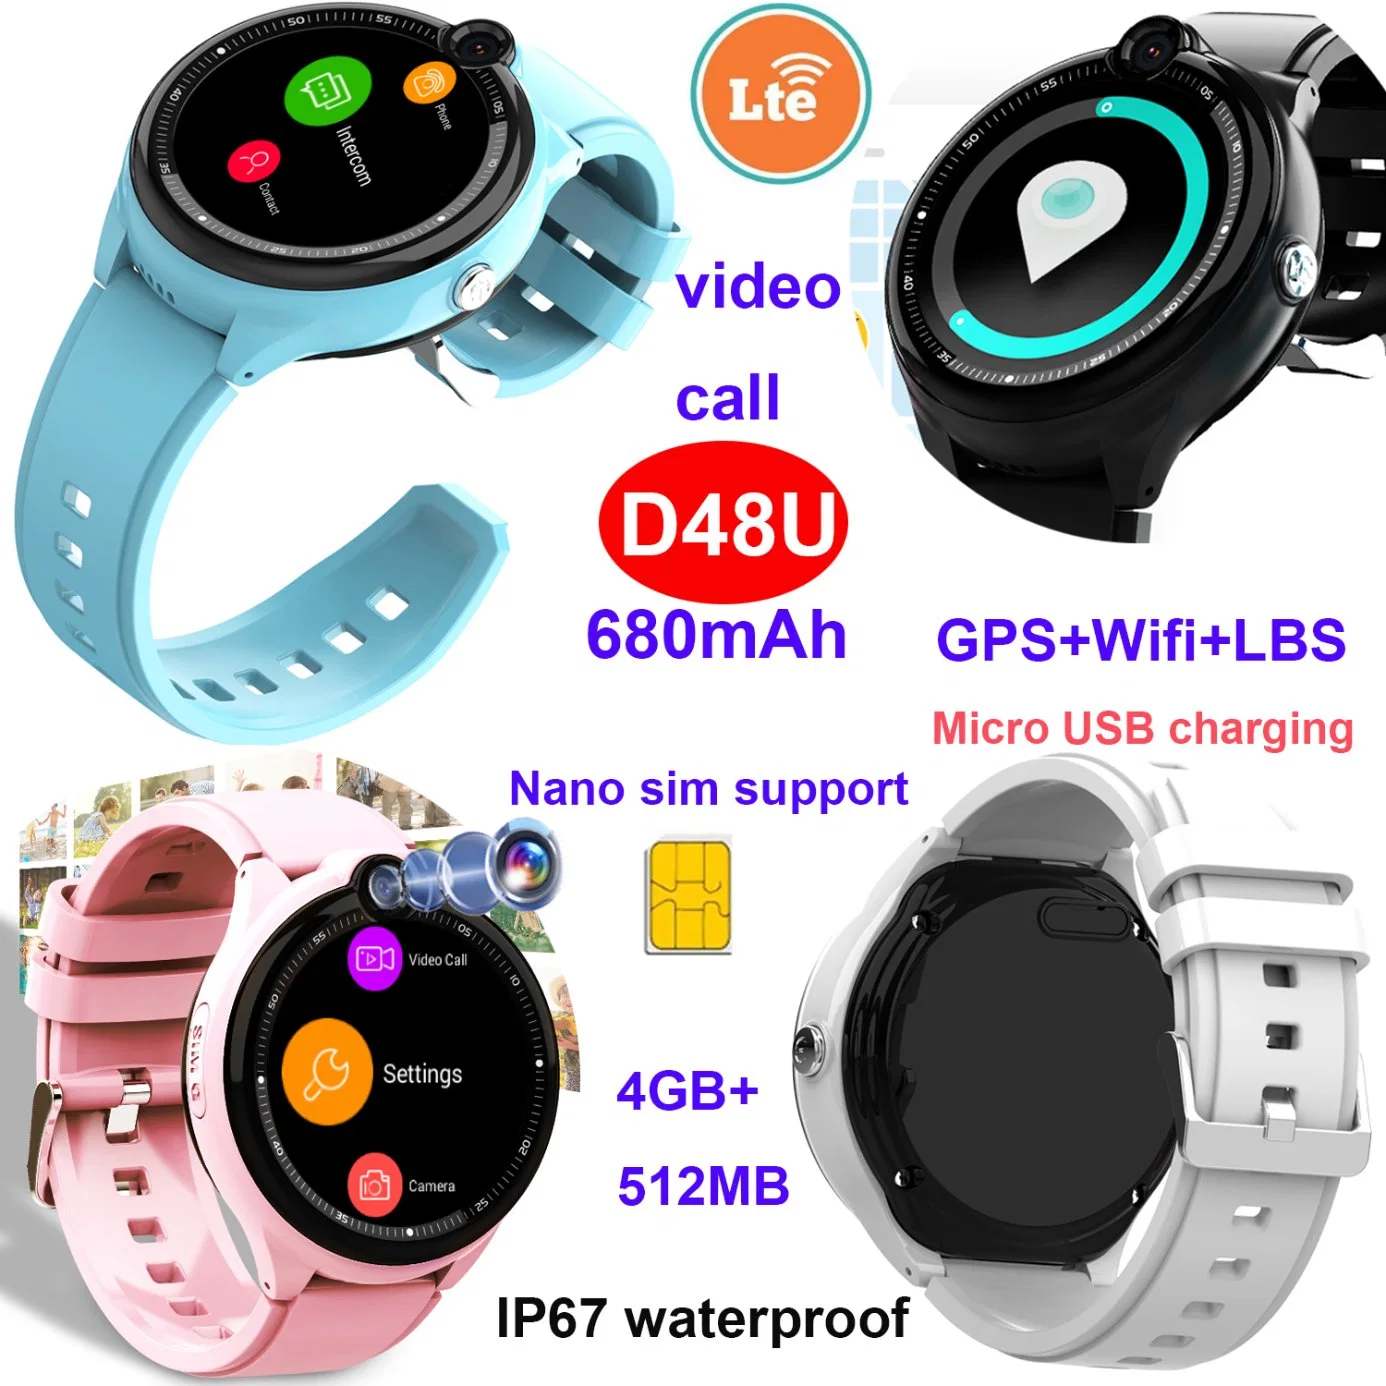 New Developed Top 4G Boys Girls Video Call accurate round screen Smart Phone Child SOS Kids GPS Tracker Watch for avoid kidnap D48U